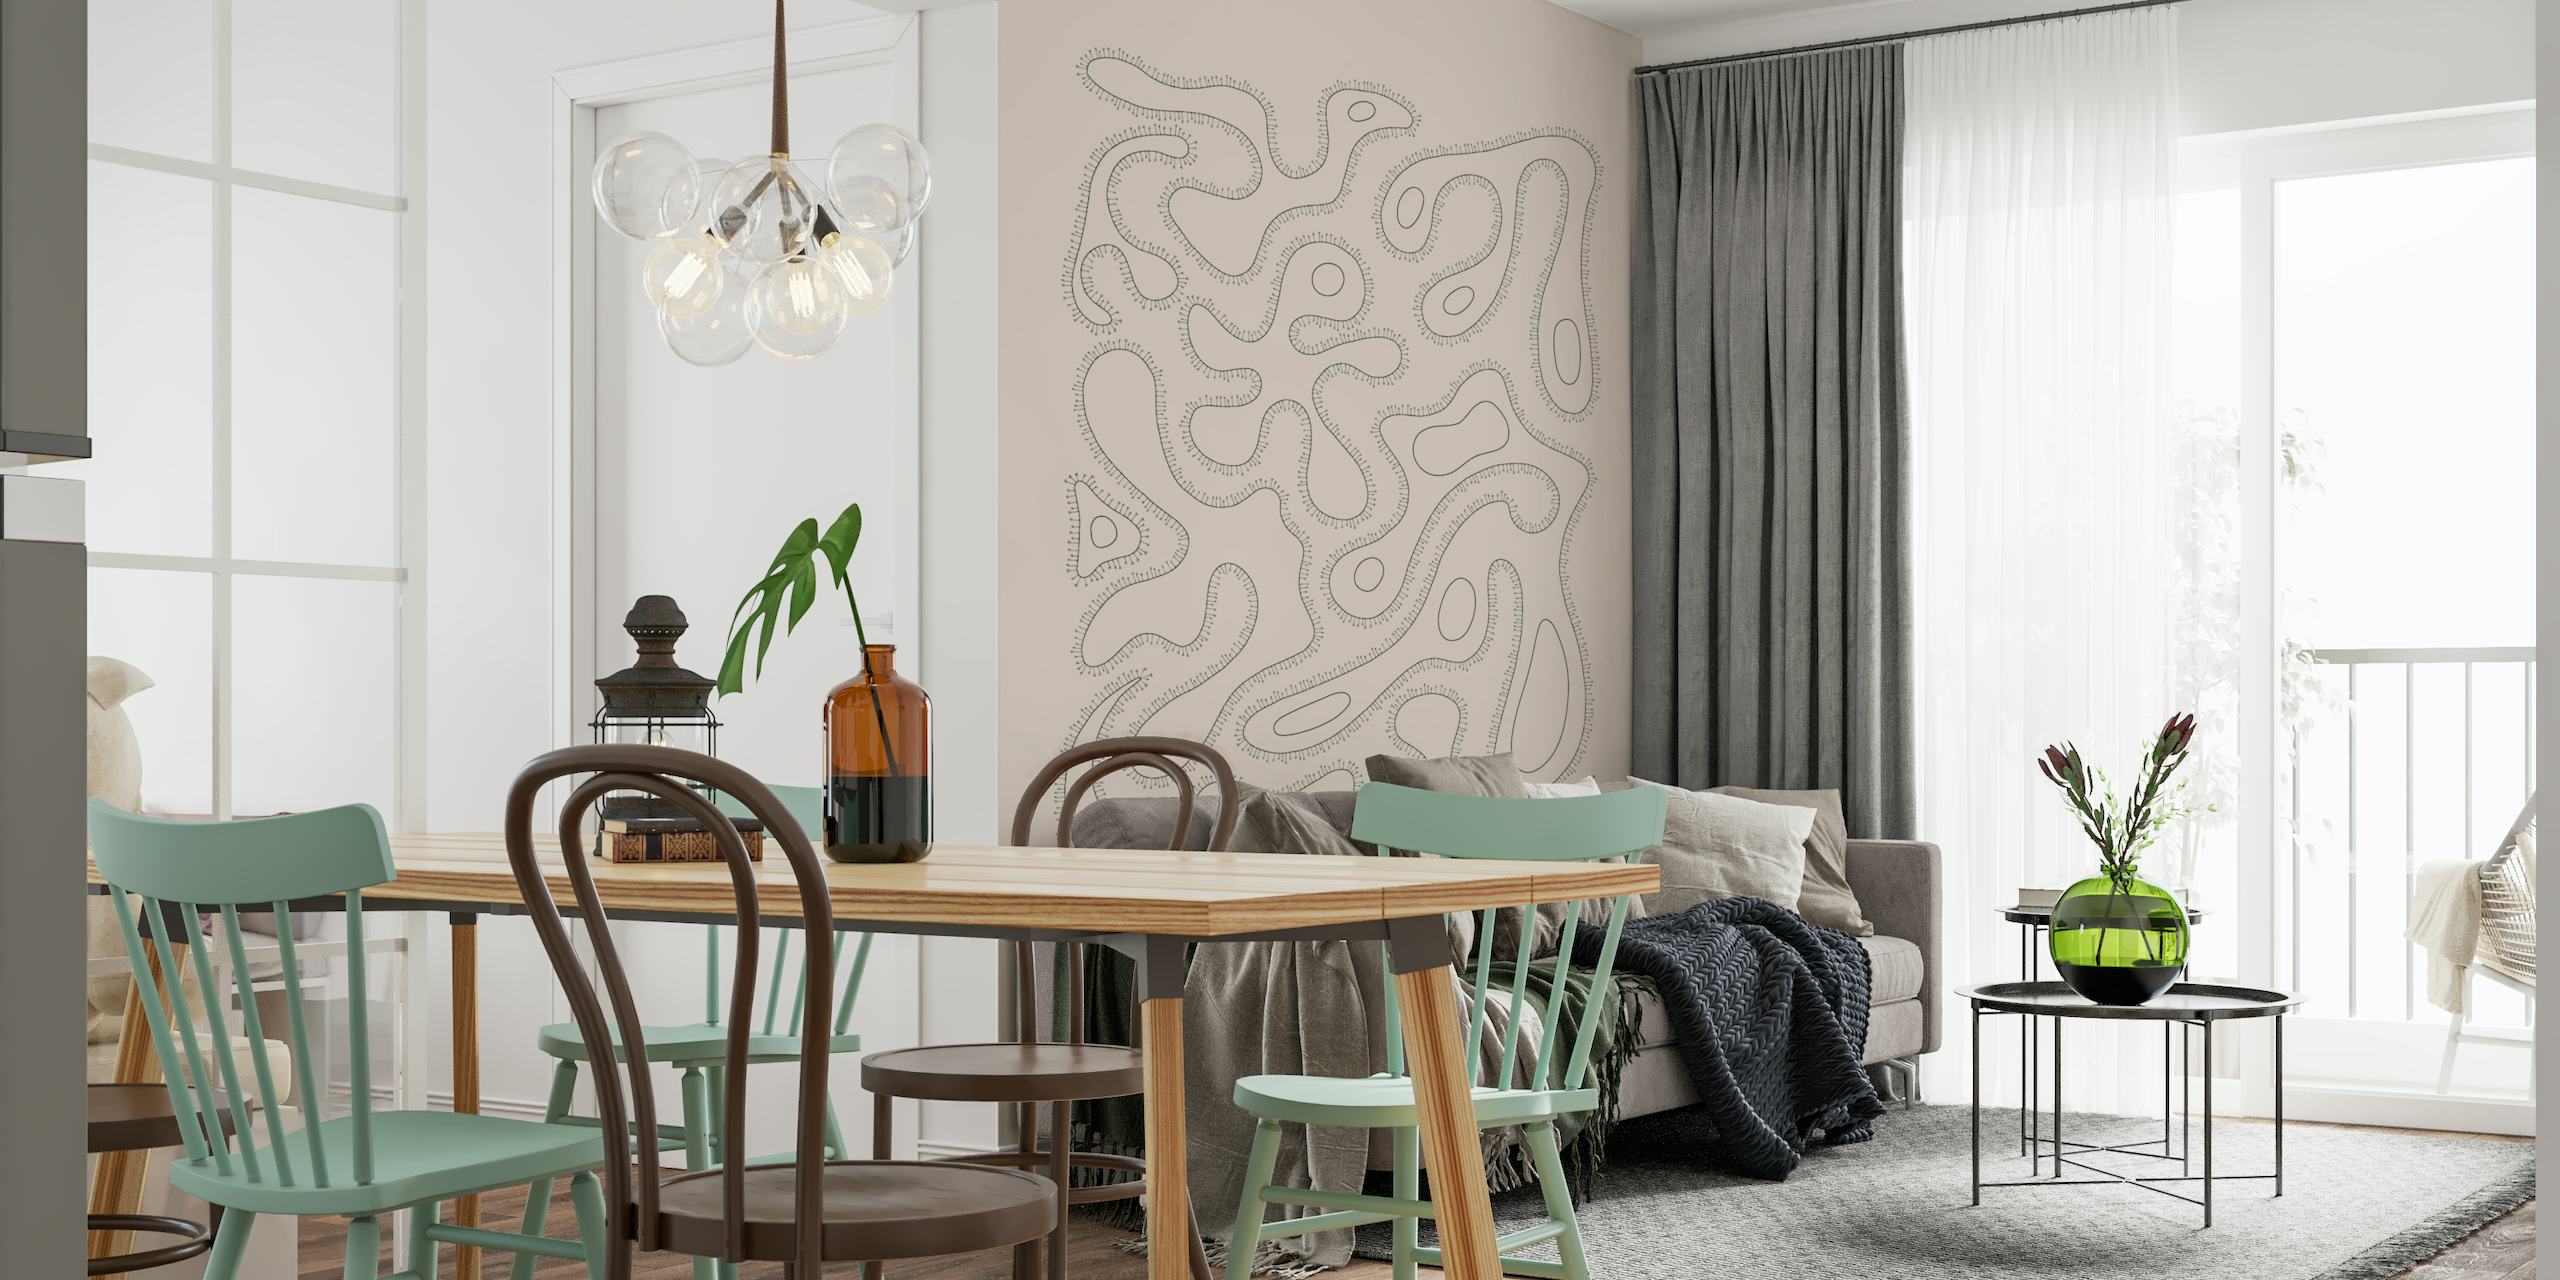 Abstract monochrome wall mural with flowing lines and organic shapes